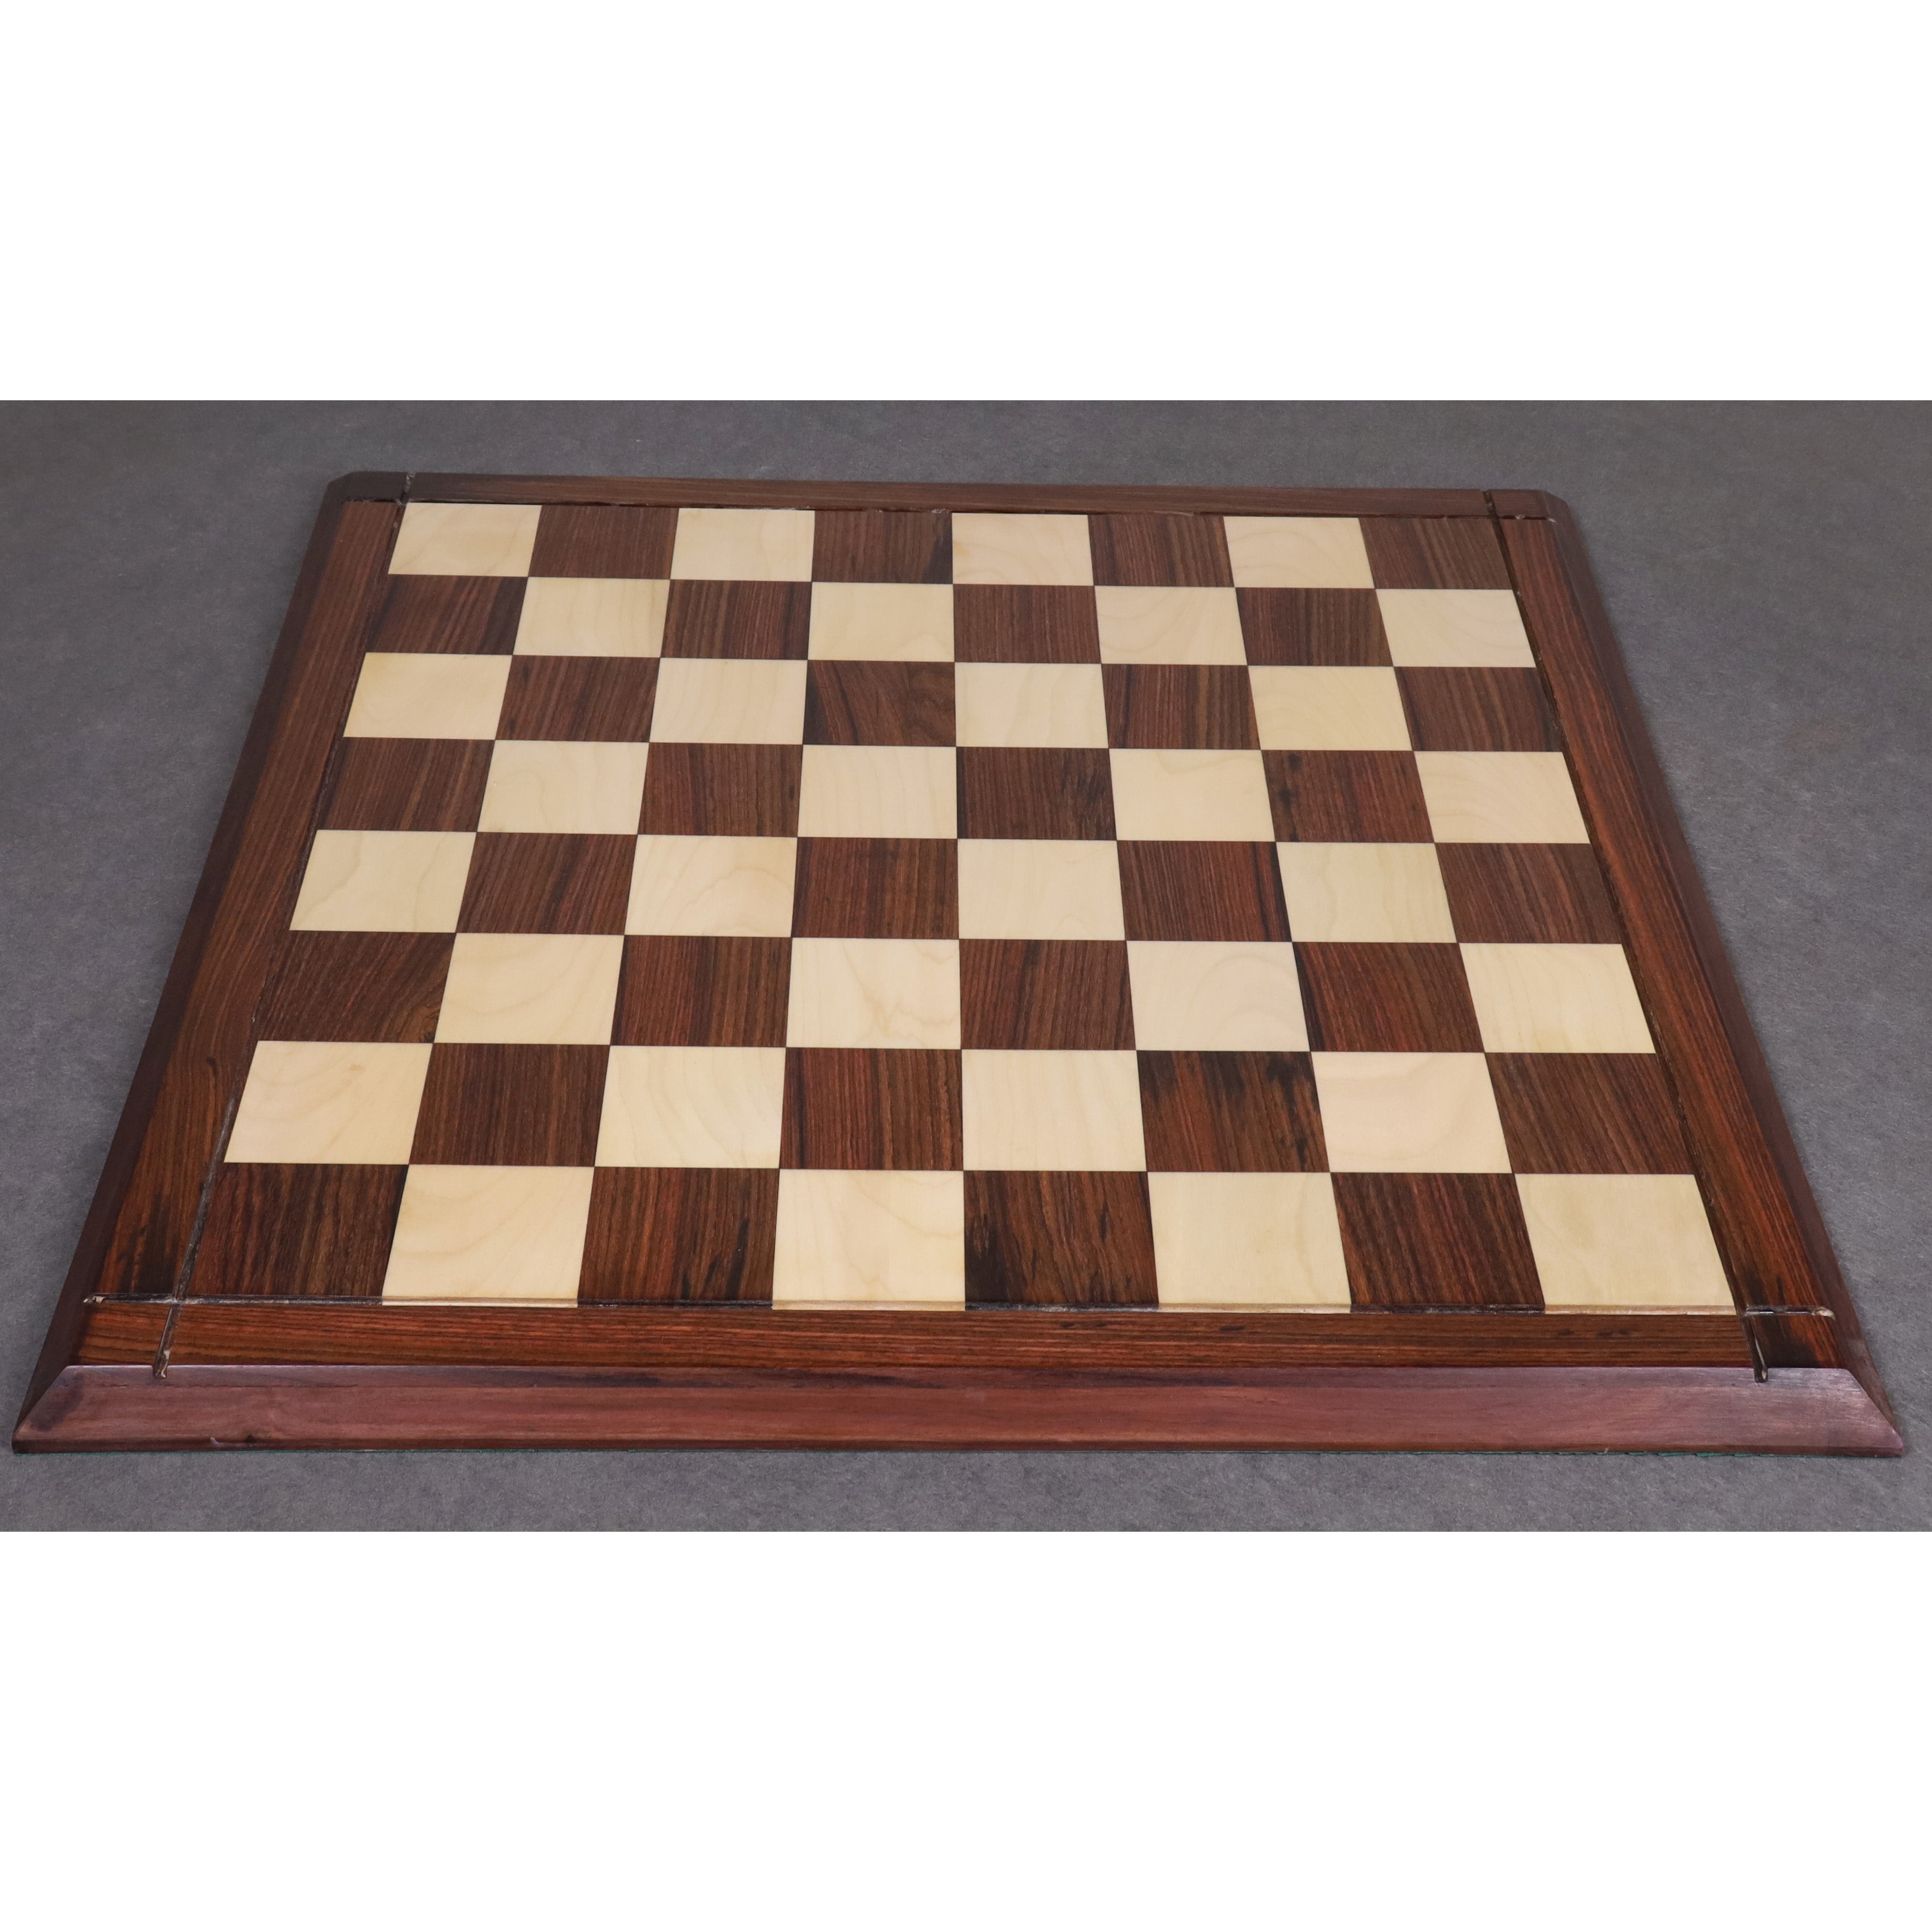 Rosewood & Maple Wood Chess board -Hand Carved Chess Pieces